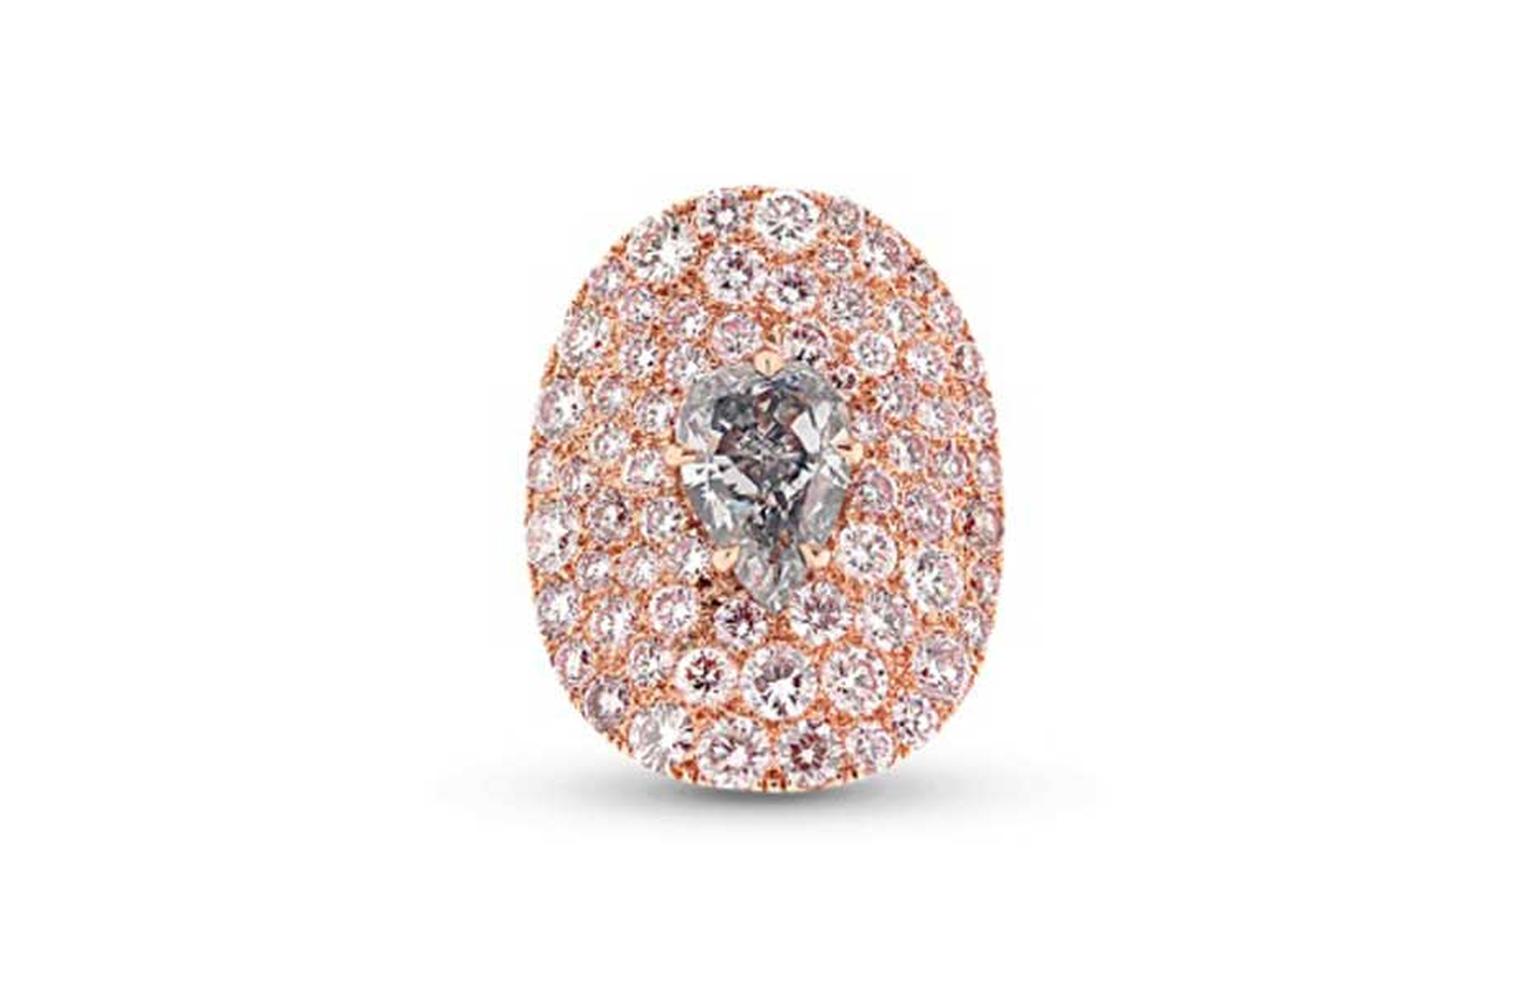 This Star Diamond "The Tear of Paris" ring is set with a rare grey blue diamond set amongst a sea of Fancy pink diamonds.